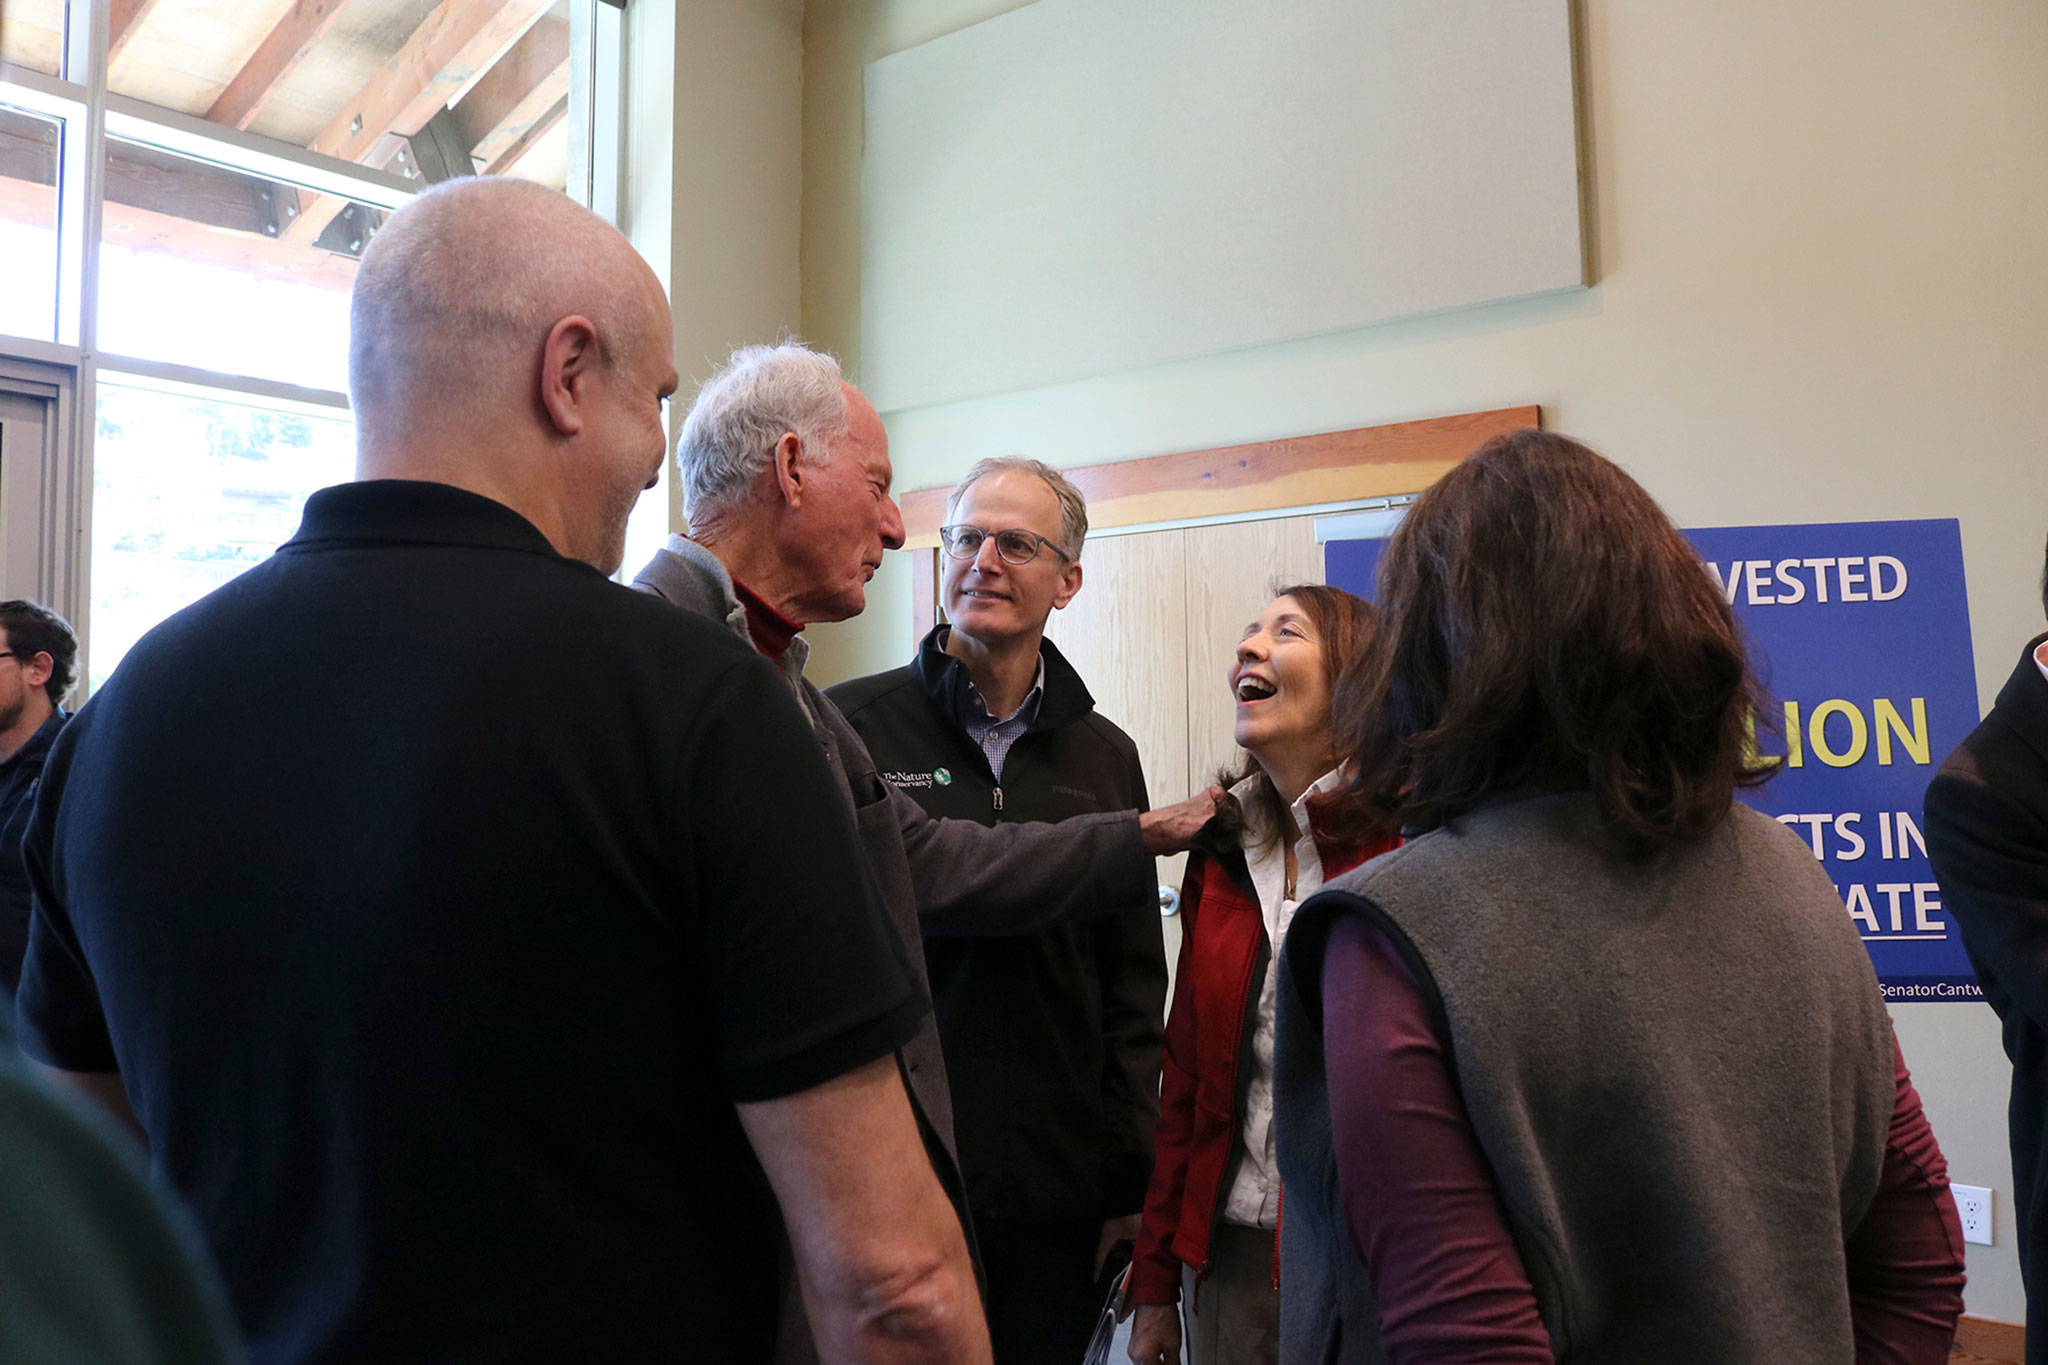 Sen. Maria Cantwell mingles with supporters after her rally on Feb. 21, including Jim Whittaker, the first American to ascend Mt. Everest. Katie Metzger/staff photo